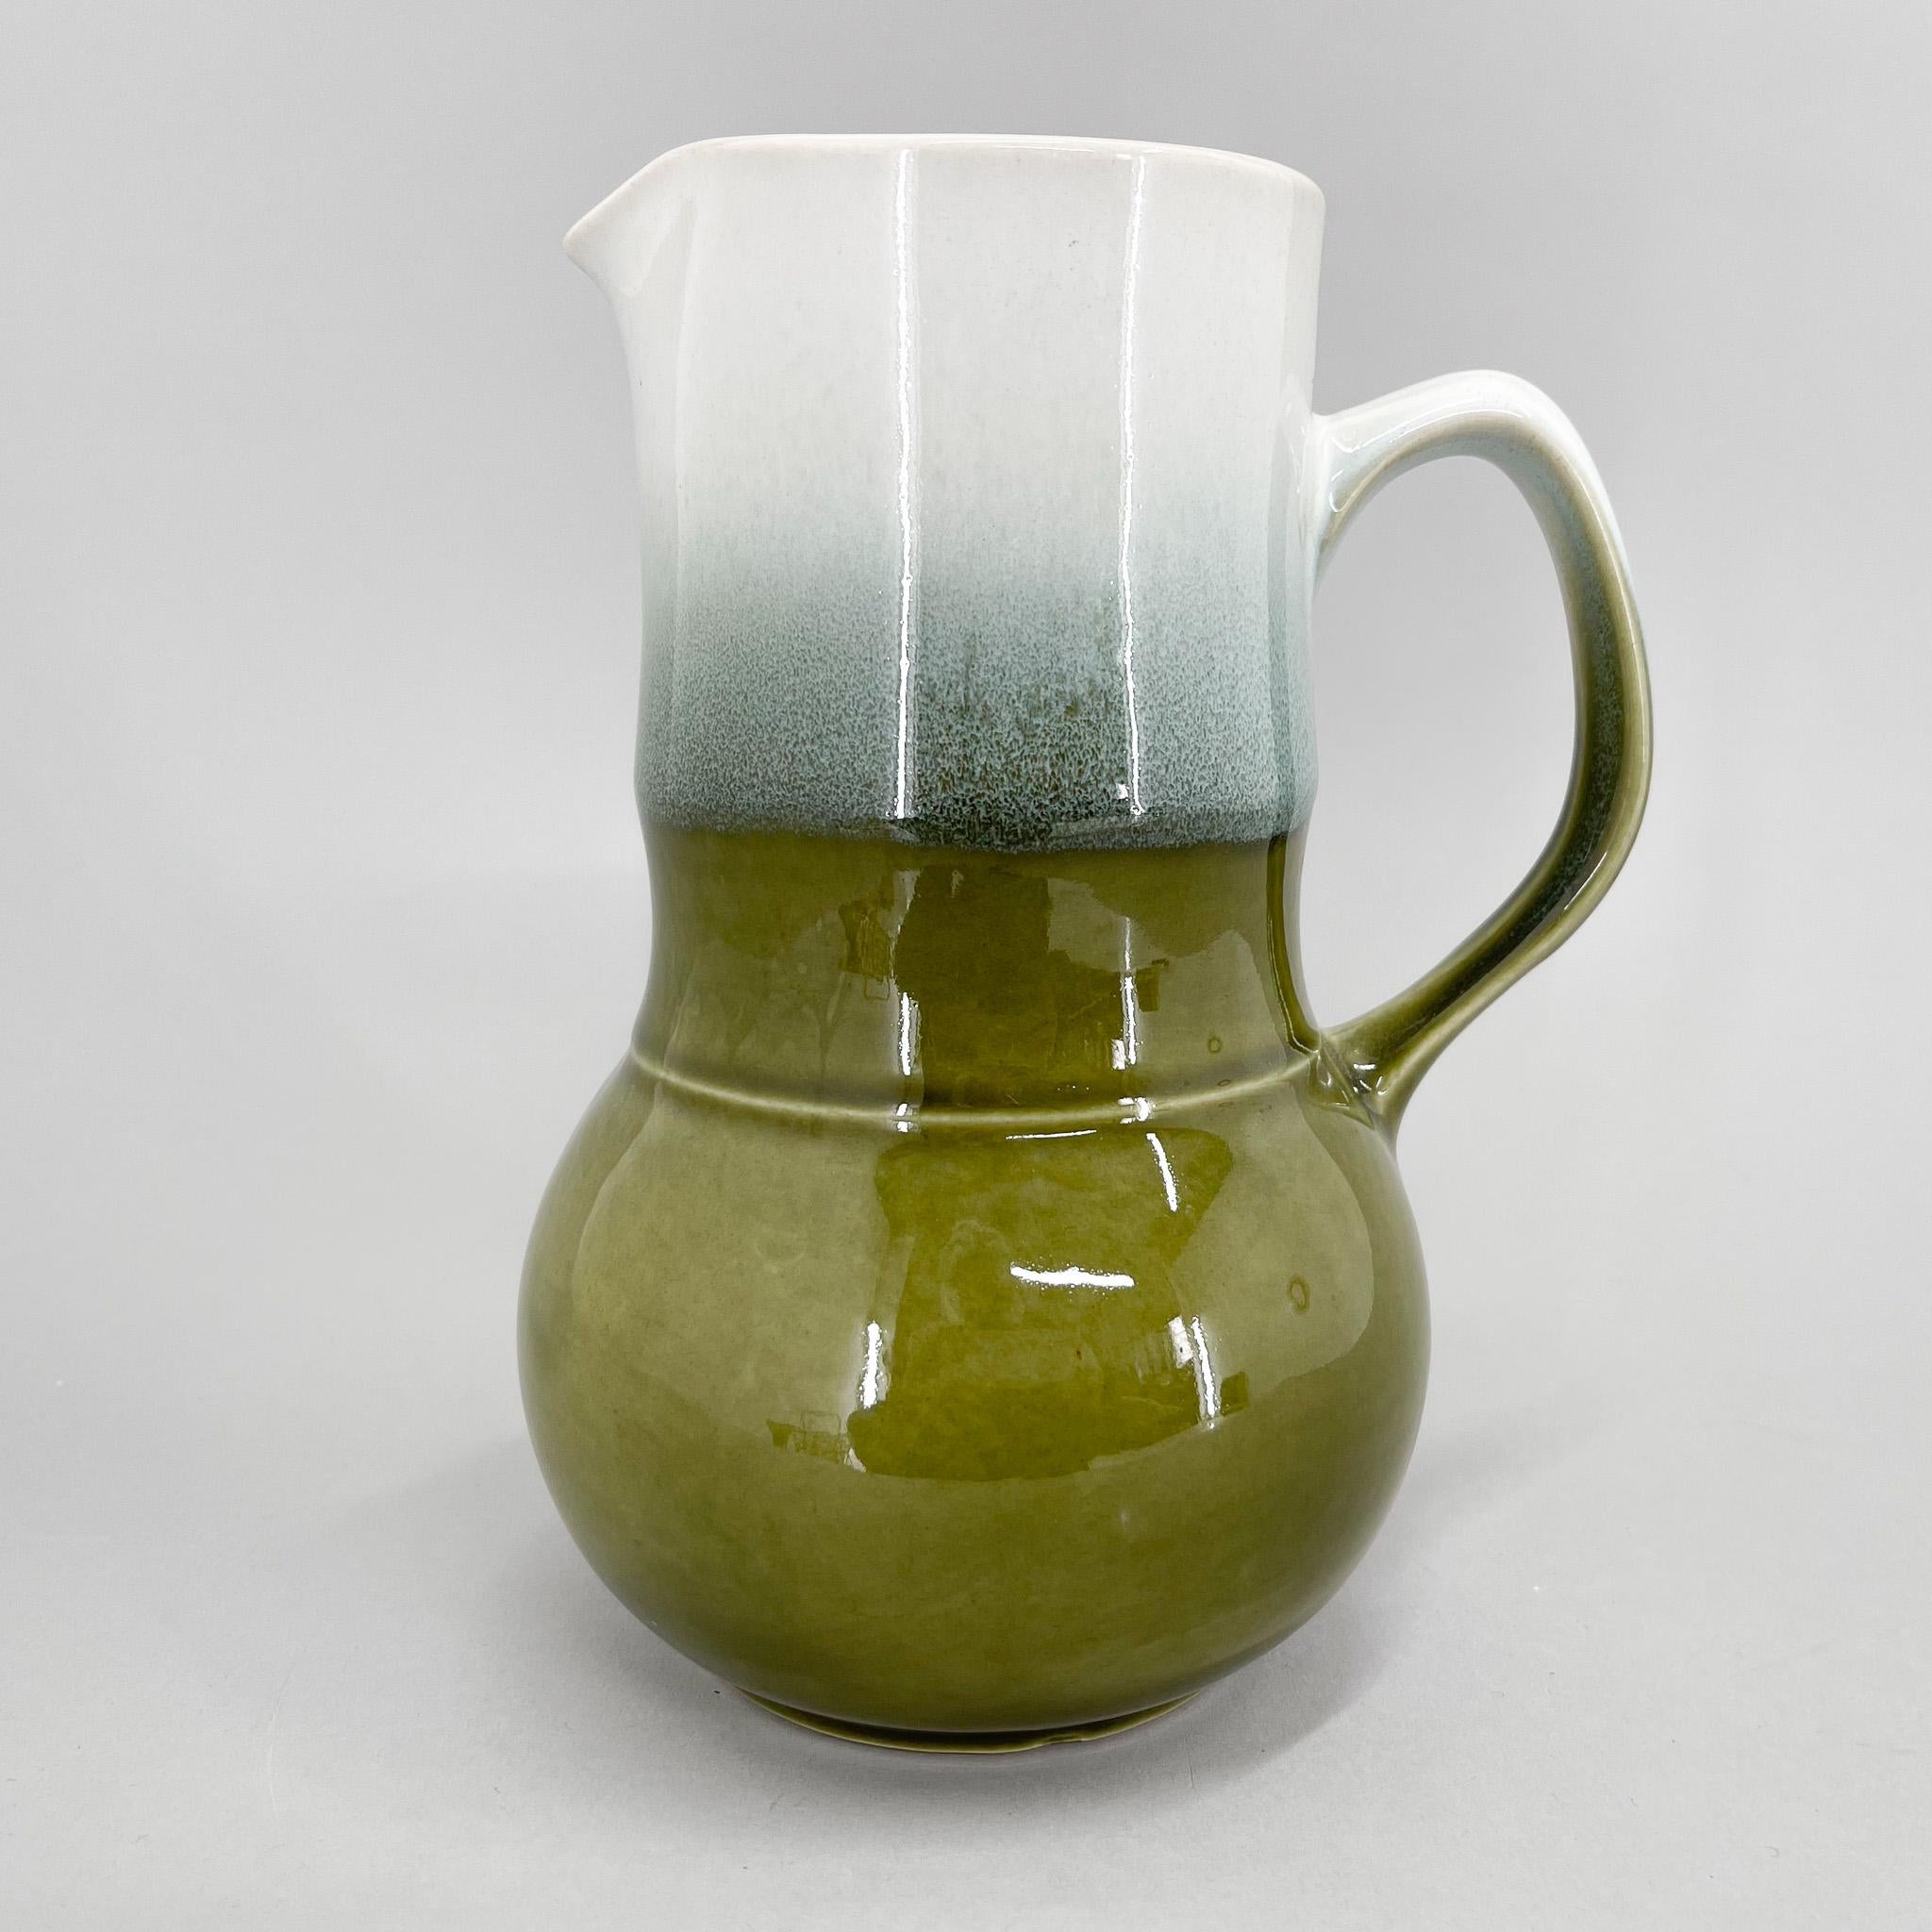 Glazed ceramic vintage jug in green and white color, produced by Ditmar Urbach in former Czechoslovakia in the 1970s.